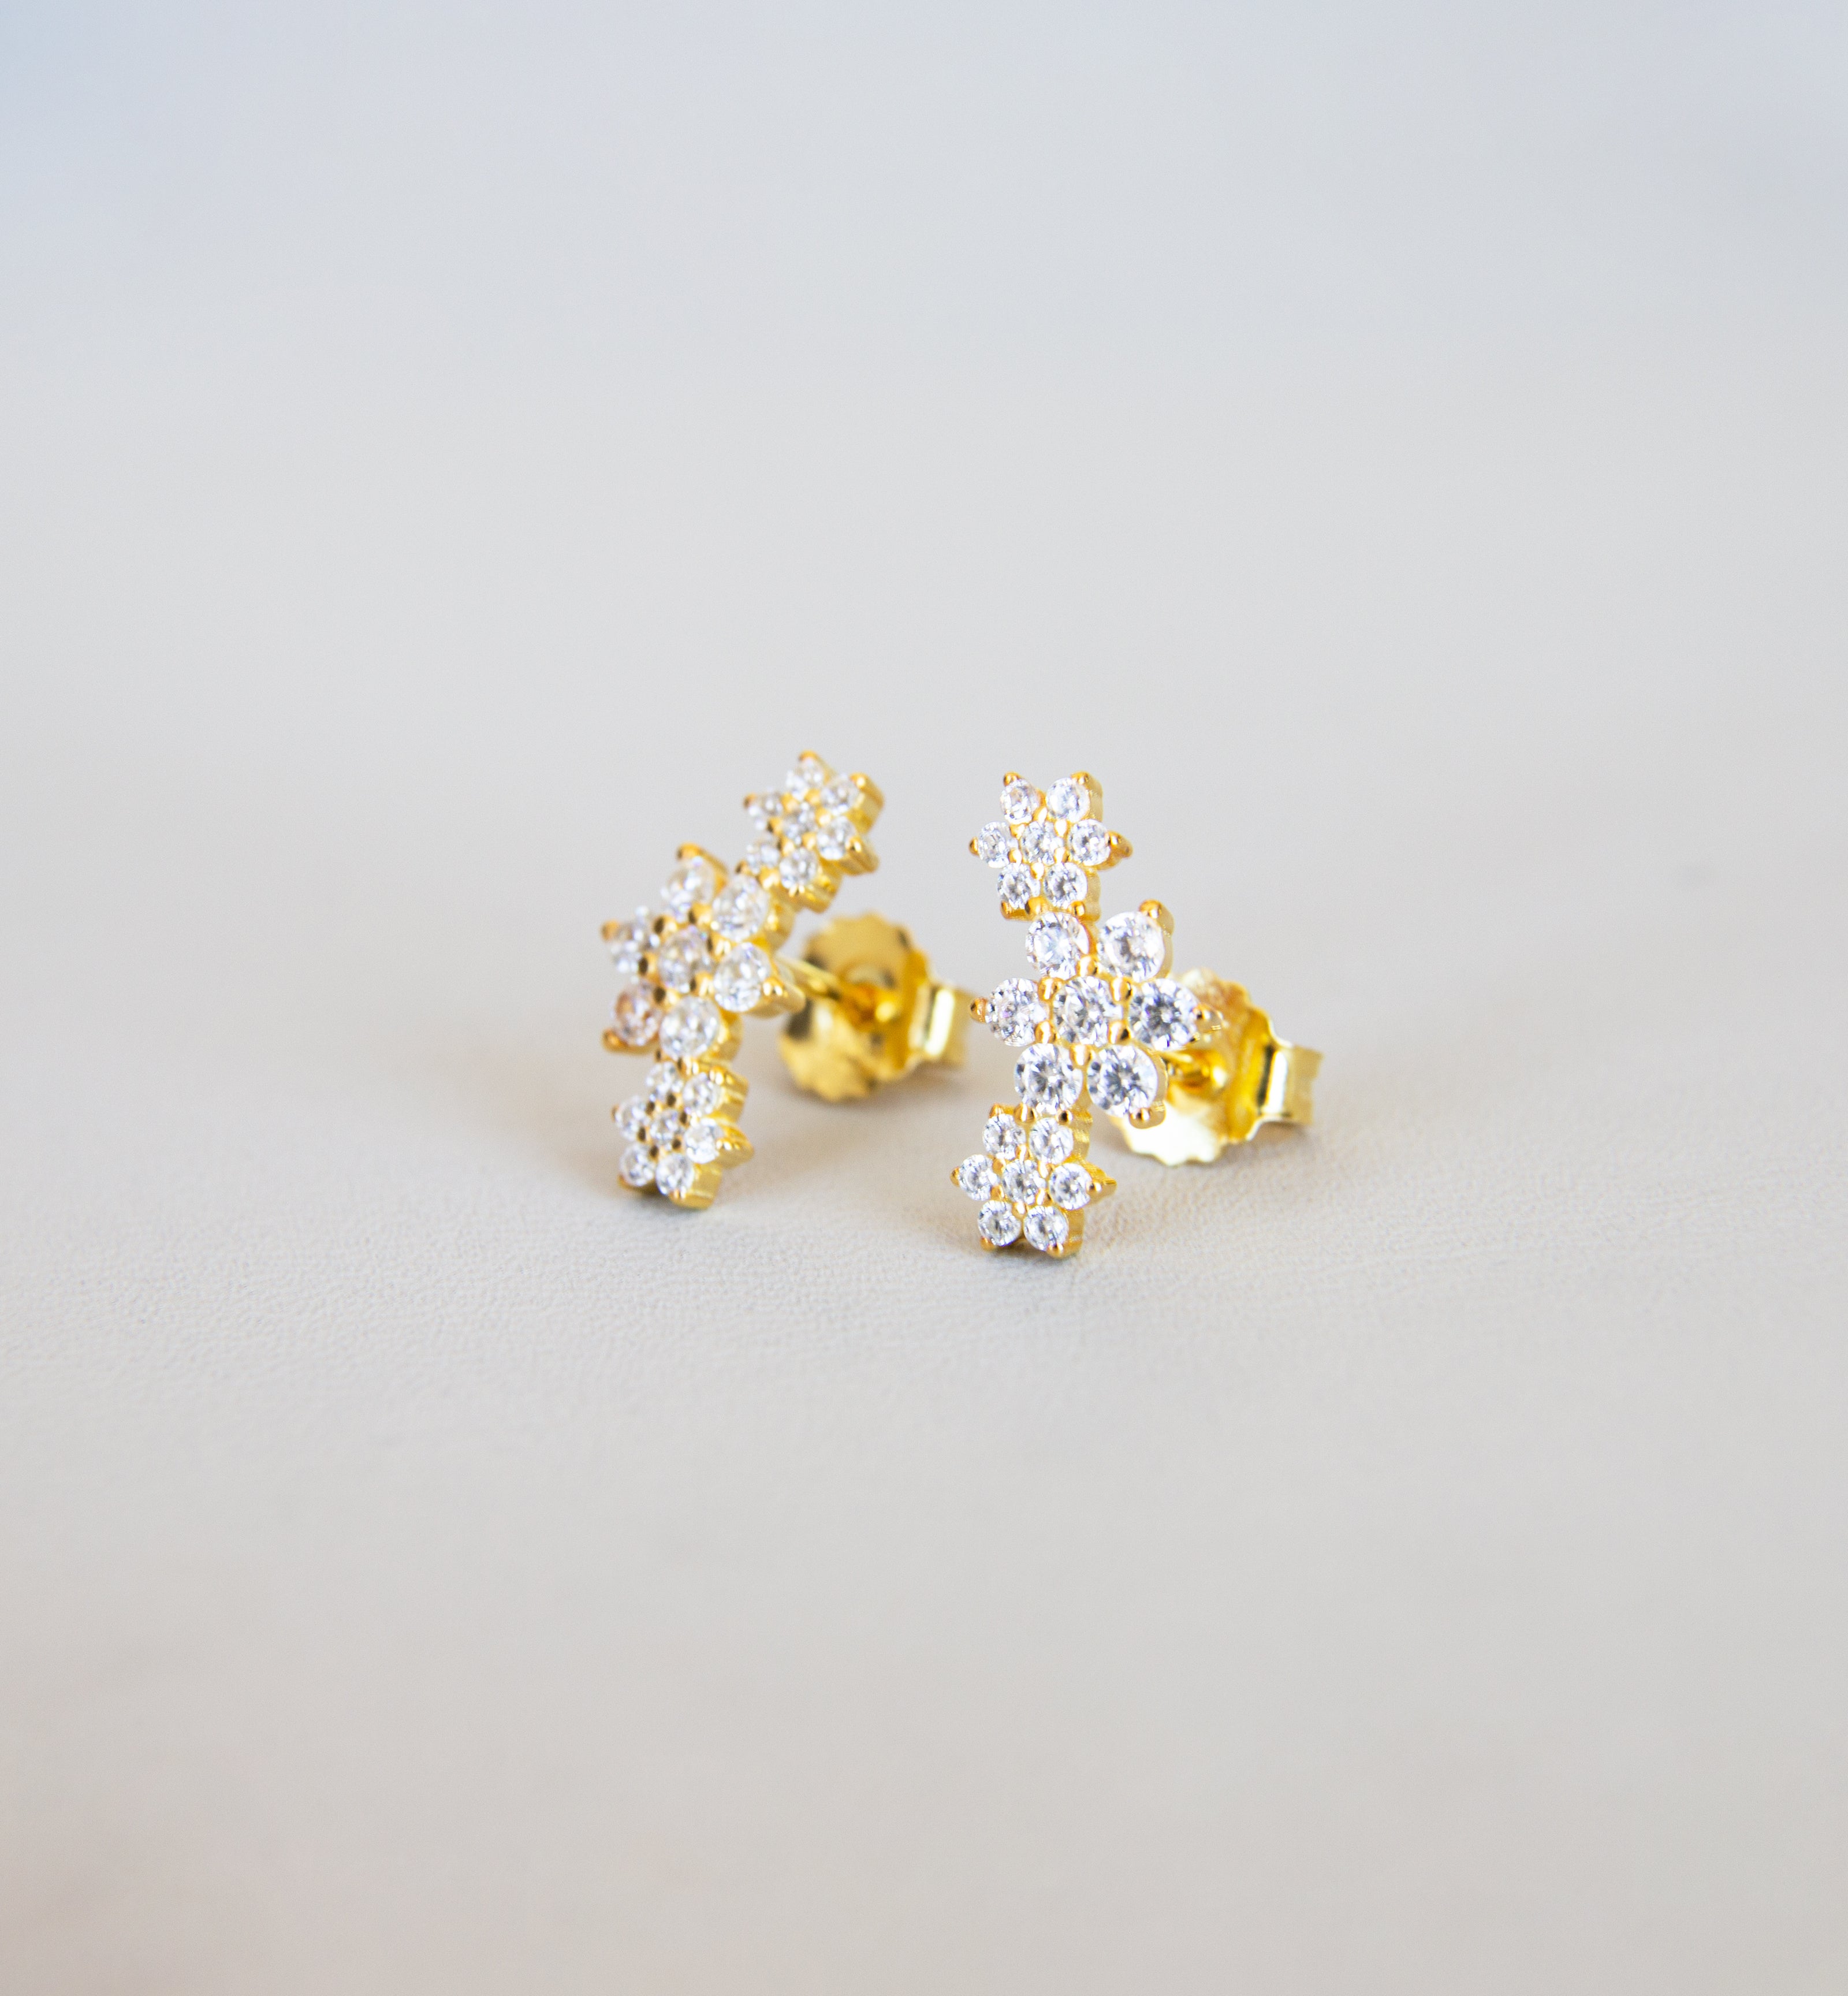 Silver 925 Yellow Gold Plated Earrings with Cubic Zircon Stones